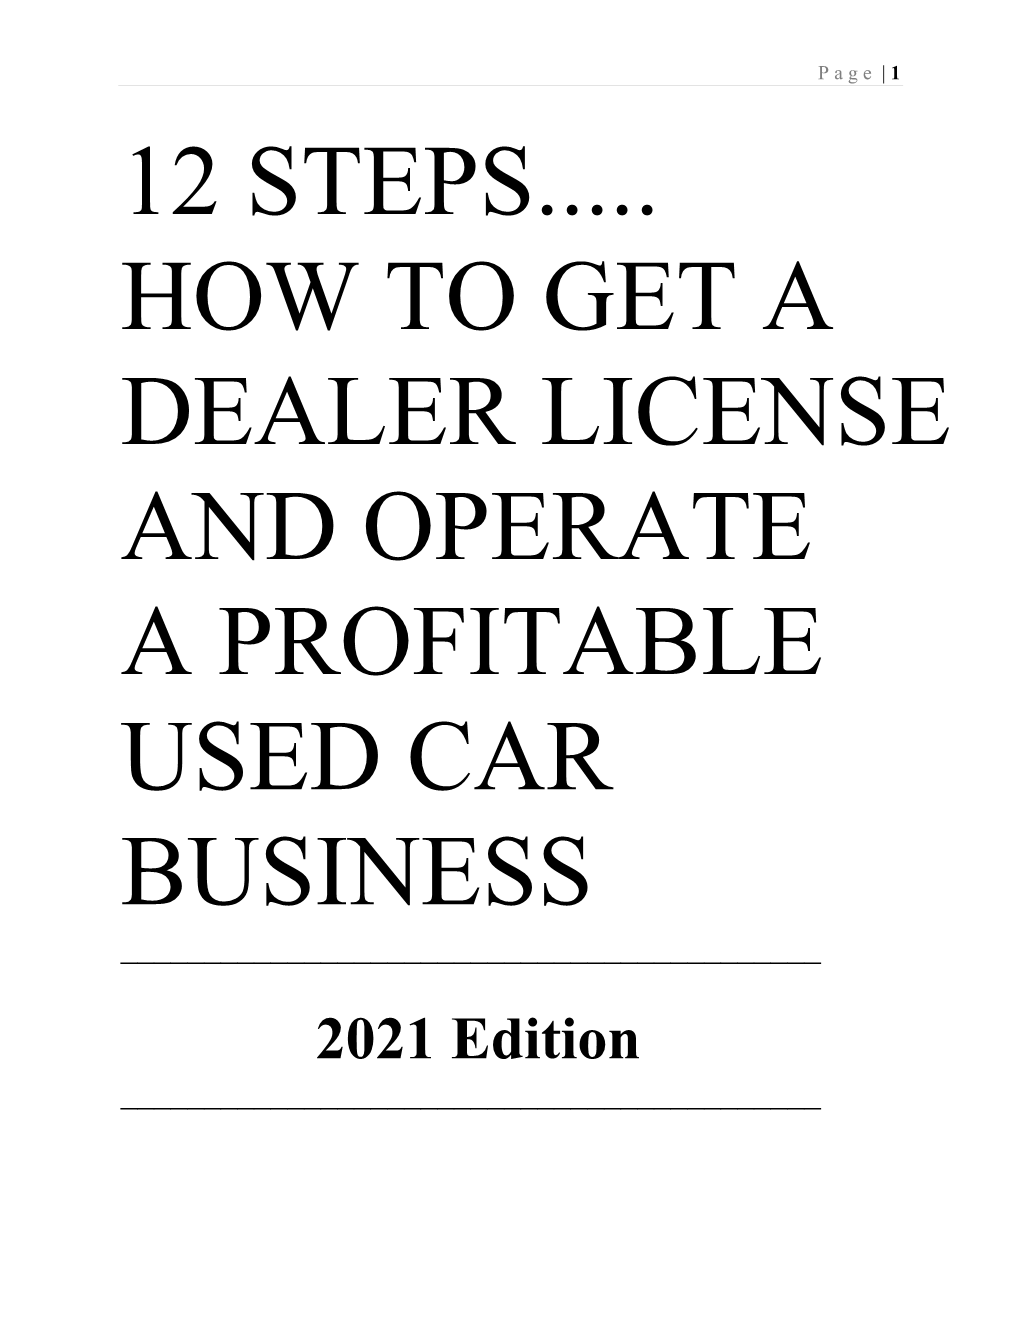 How to Get a Used Car Dealer License